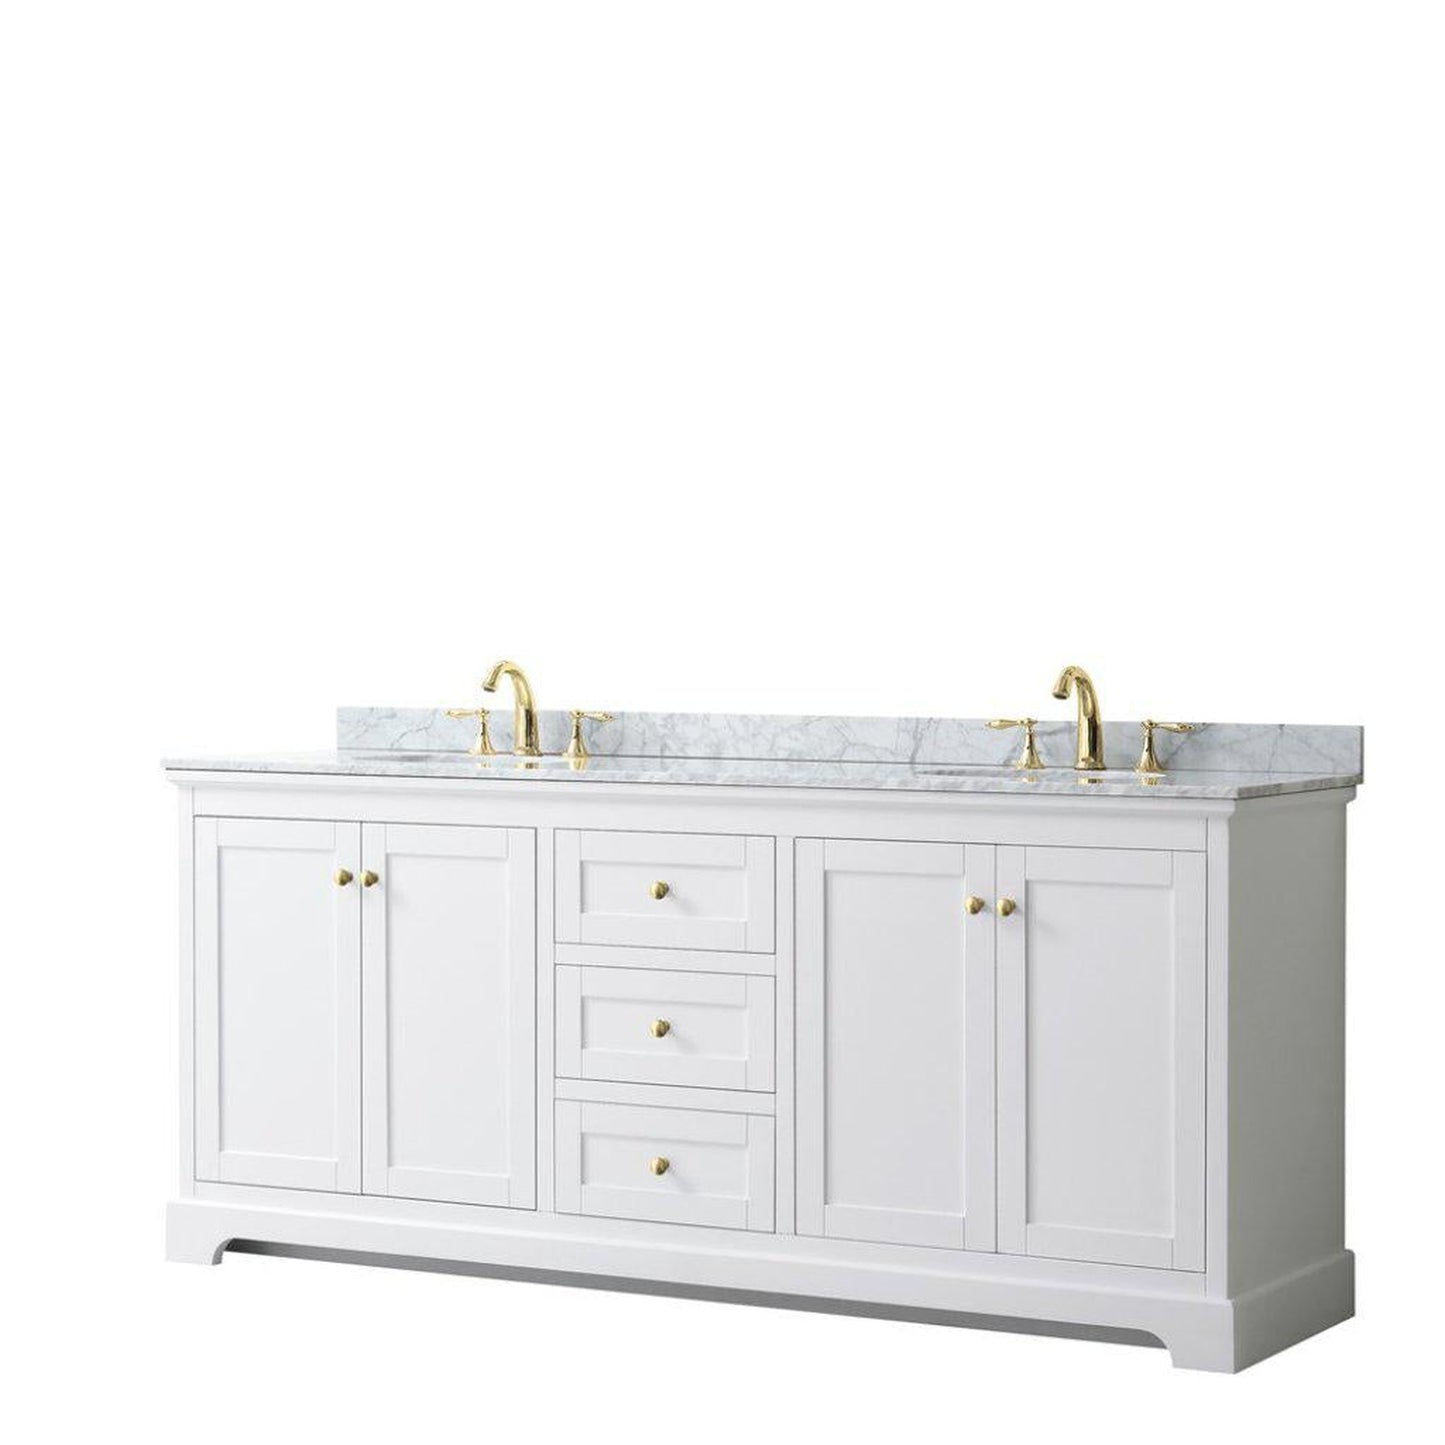 Wyndham Collection Avery 80" White Double Bathroom Vanity, White Carrara Marble Countertop With 3-Hole Faucet, 8" Oval Sink, Gold Trims